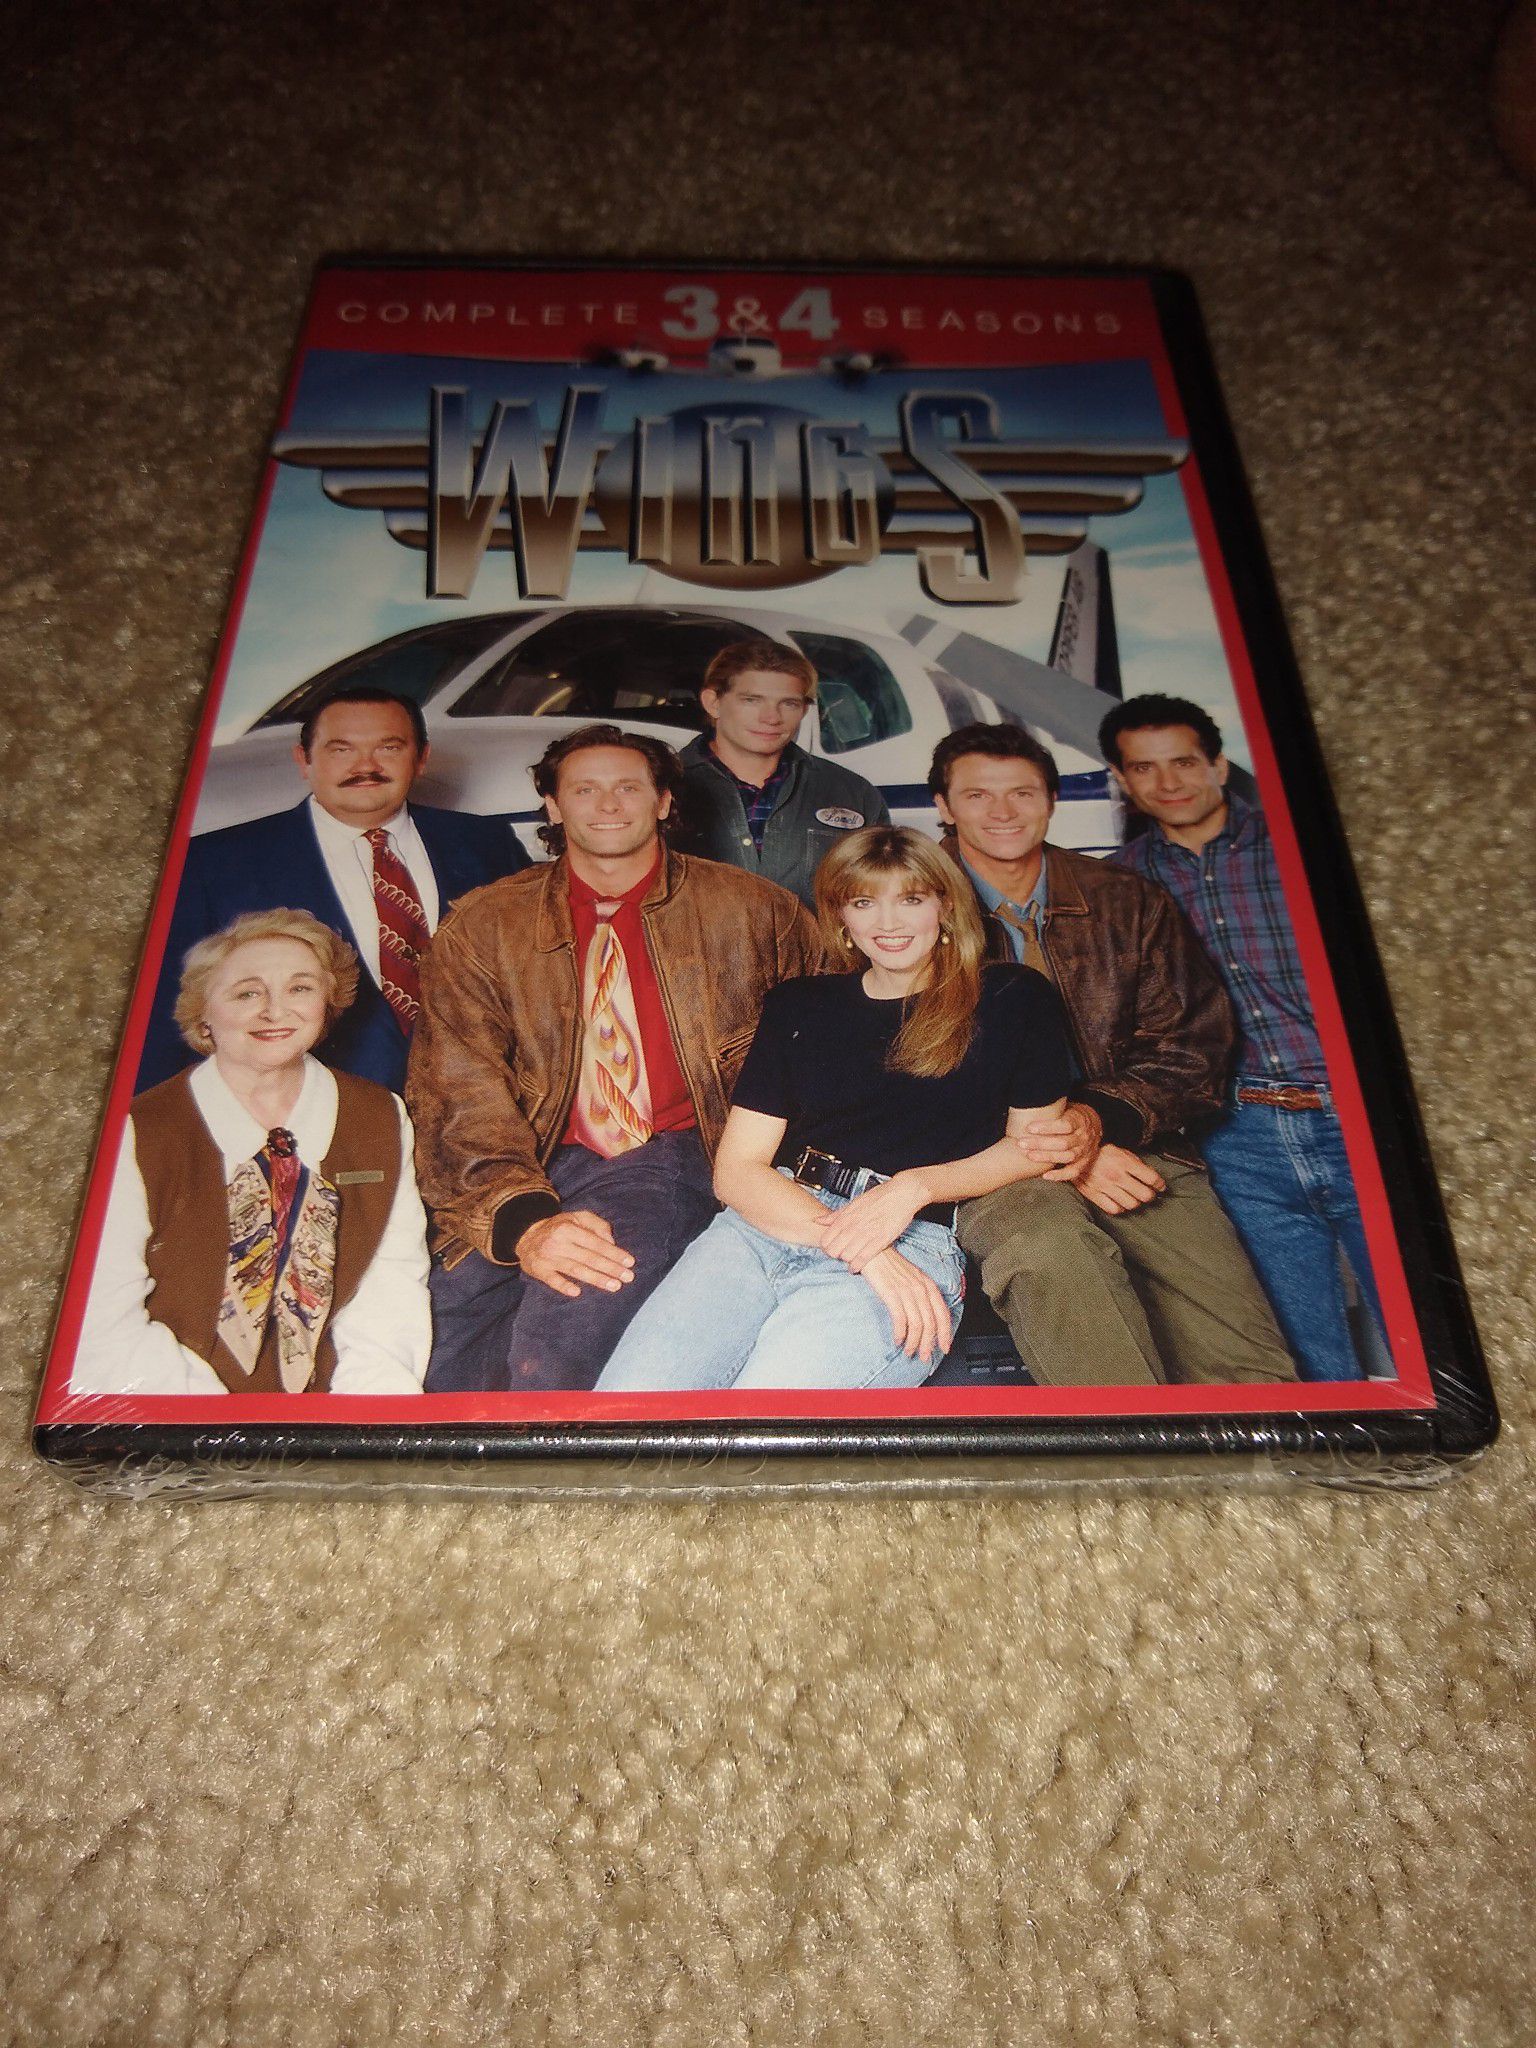 Wings: Complete Seasons 3 4 (DVD, 2014, 5-Disc Set). Condition is Brand New.